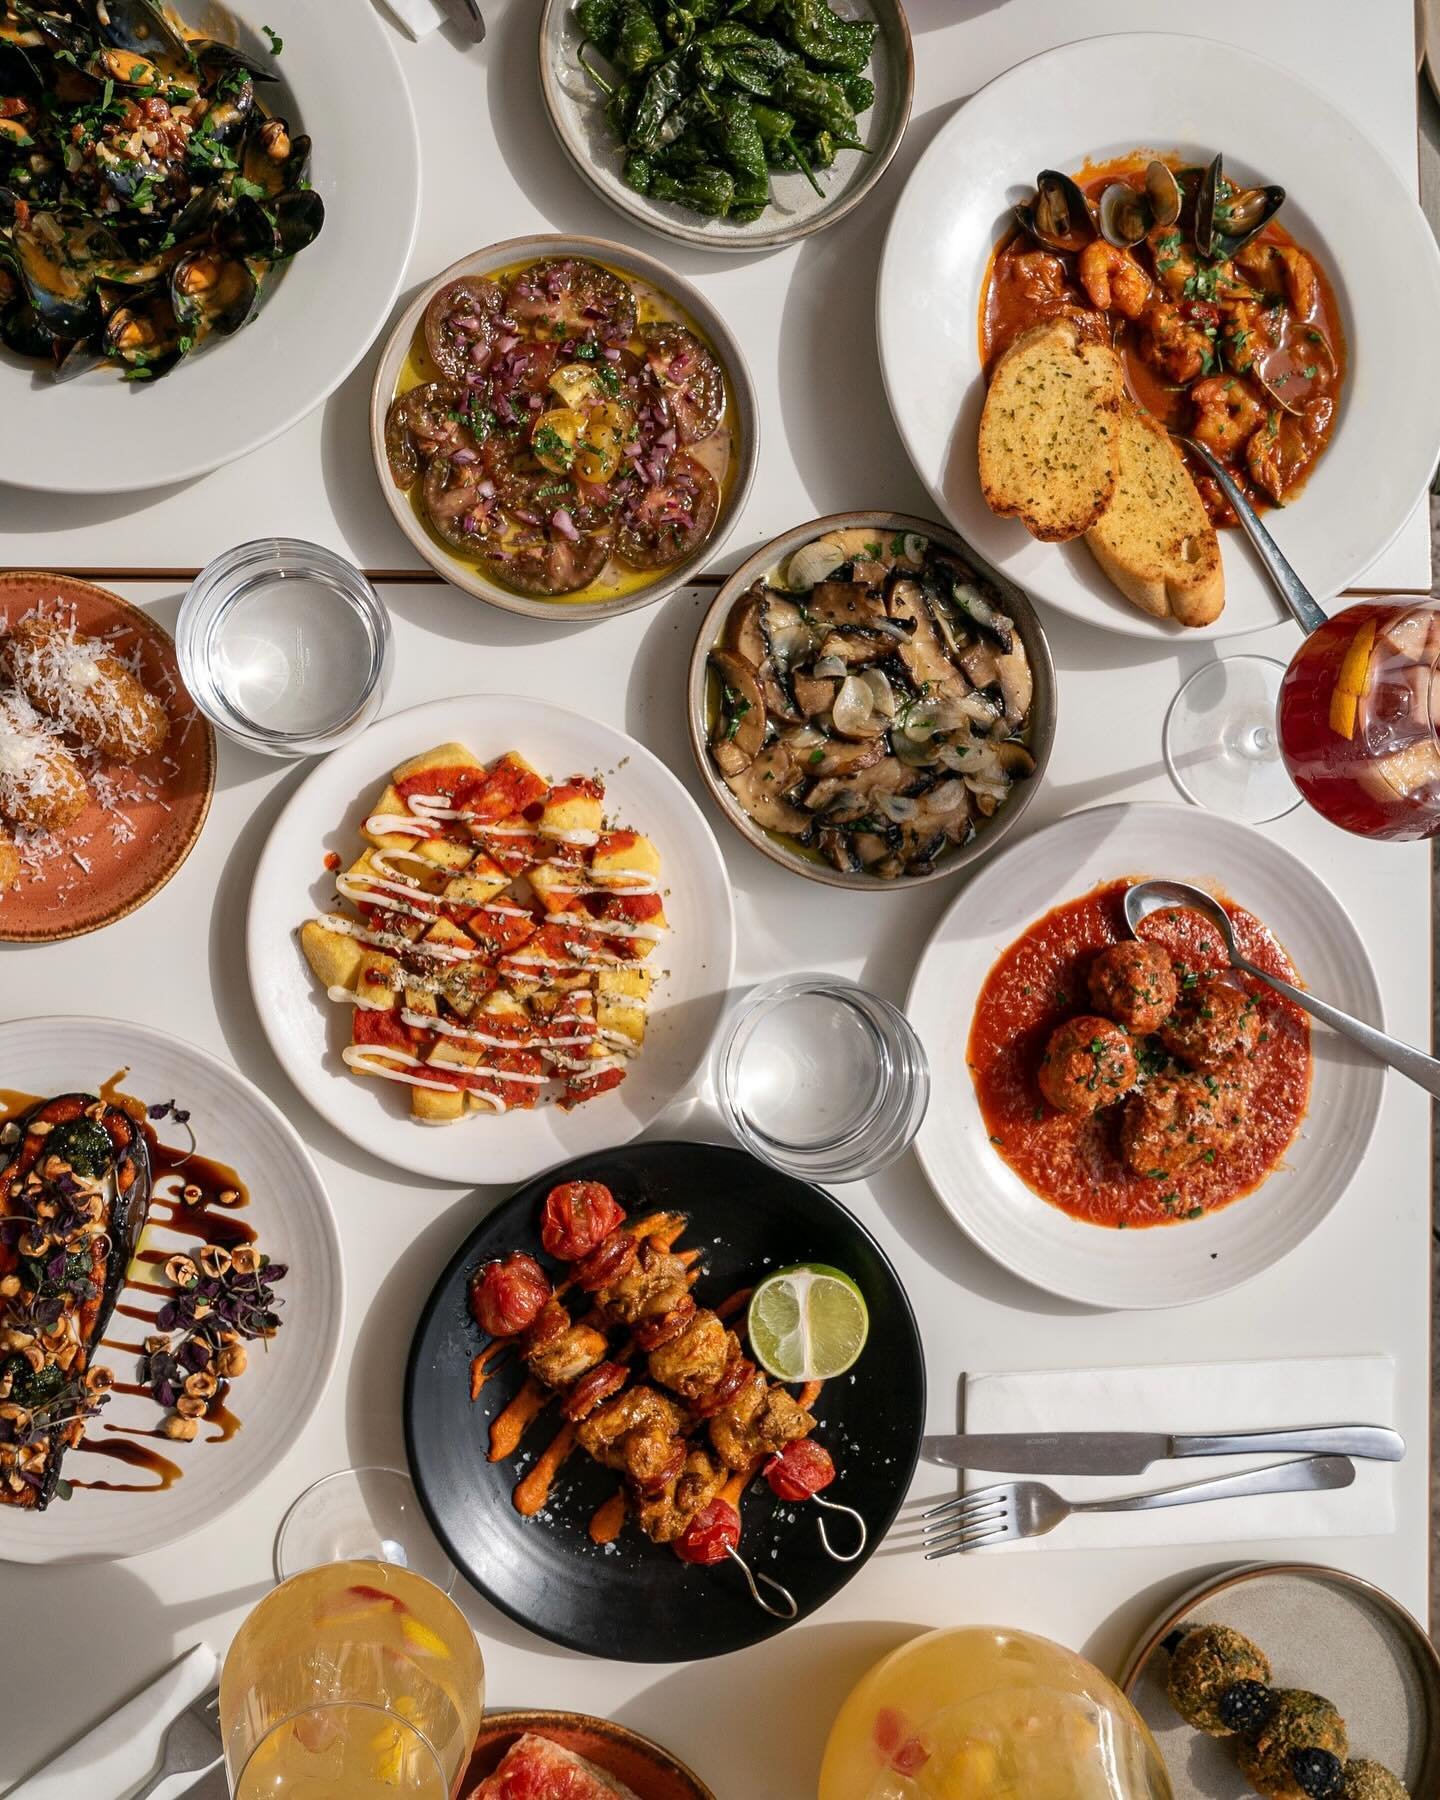 Ready, set, tapas! 🍽️
With so many tempting options, it's hard picking just one! Which tapa steals your heart?😄
.
.
.
.
#tapasrestaurant #tapasnight #tapastime #tapaslover #tapaslovers #londonfoodscene #londonfoodguide #lagambalondon